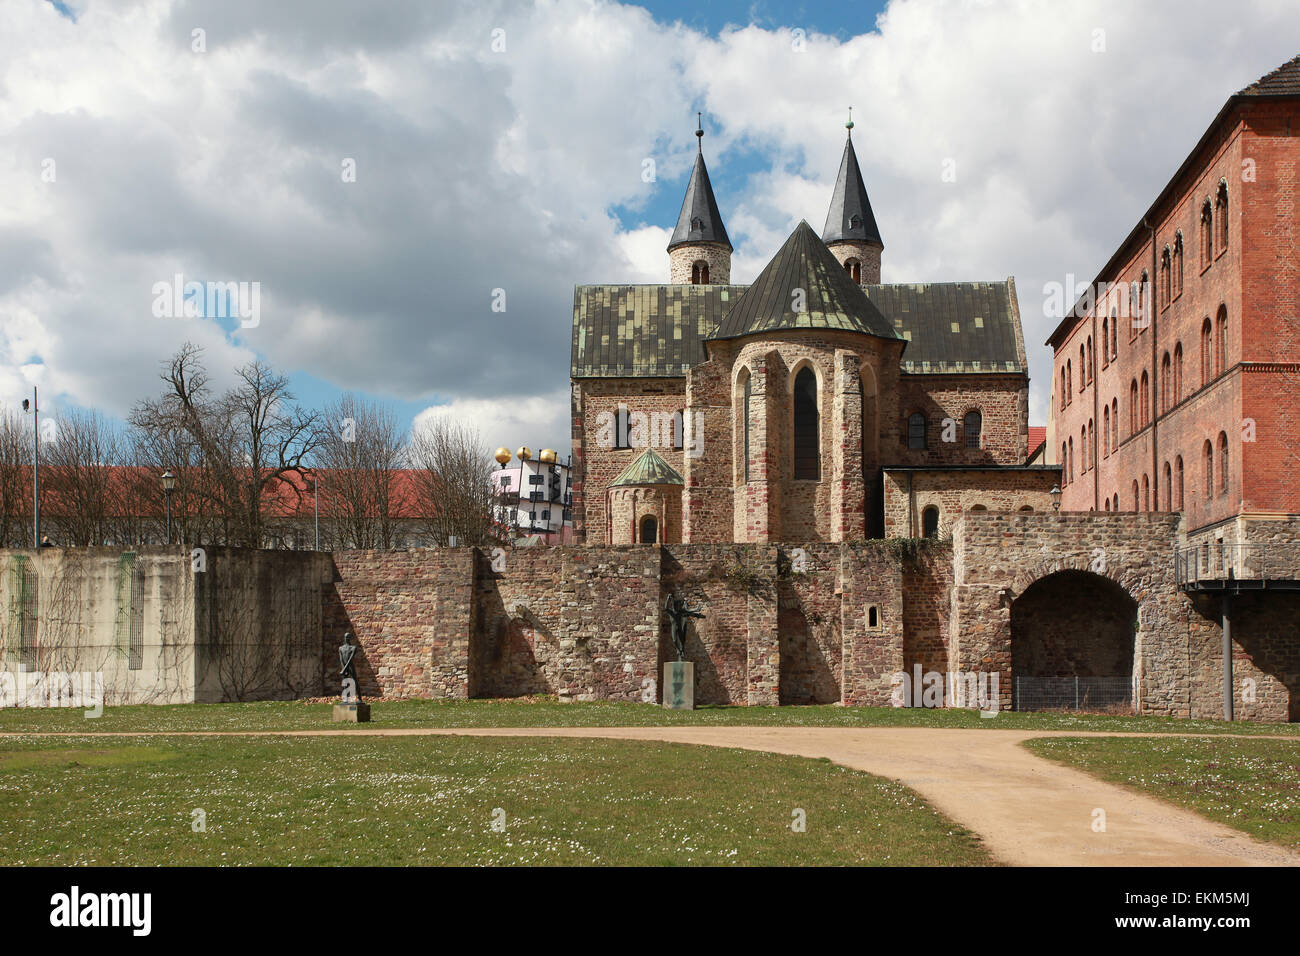 View on the Monastery of Our Lady, which hosts the Art Museum and the Georg Philipp Telemann concert hall. Magdeburg, Germany. Stock Photo